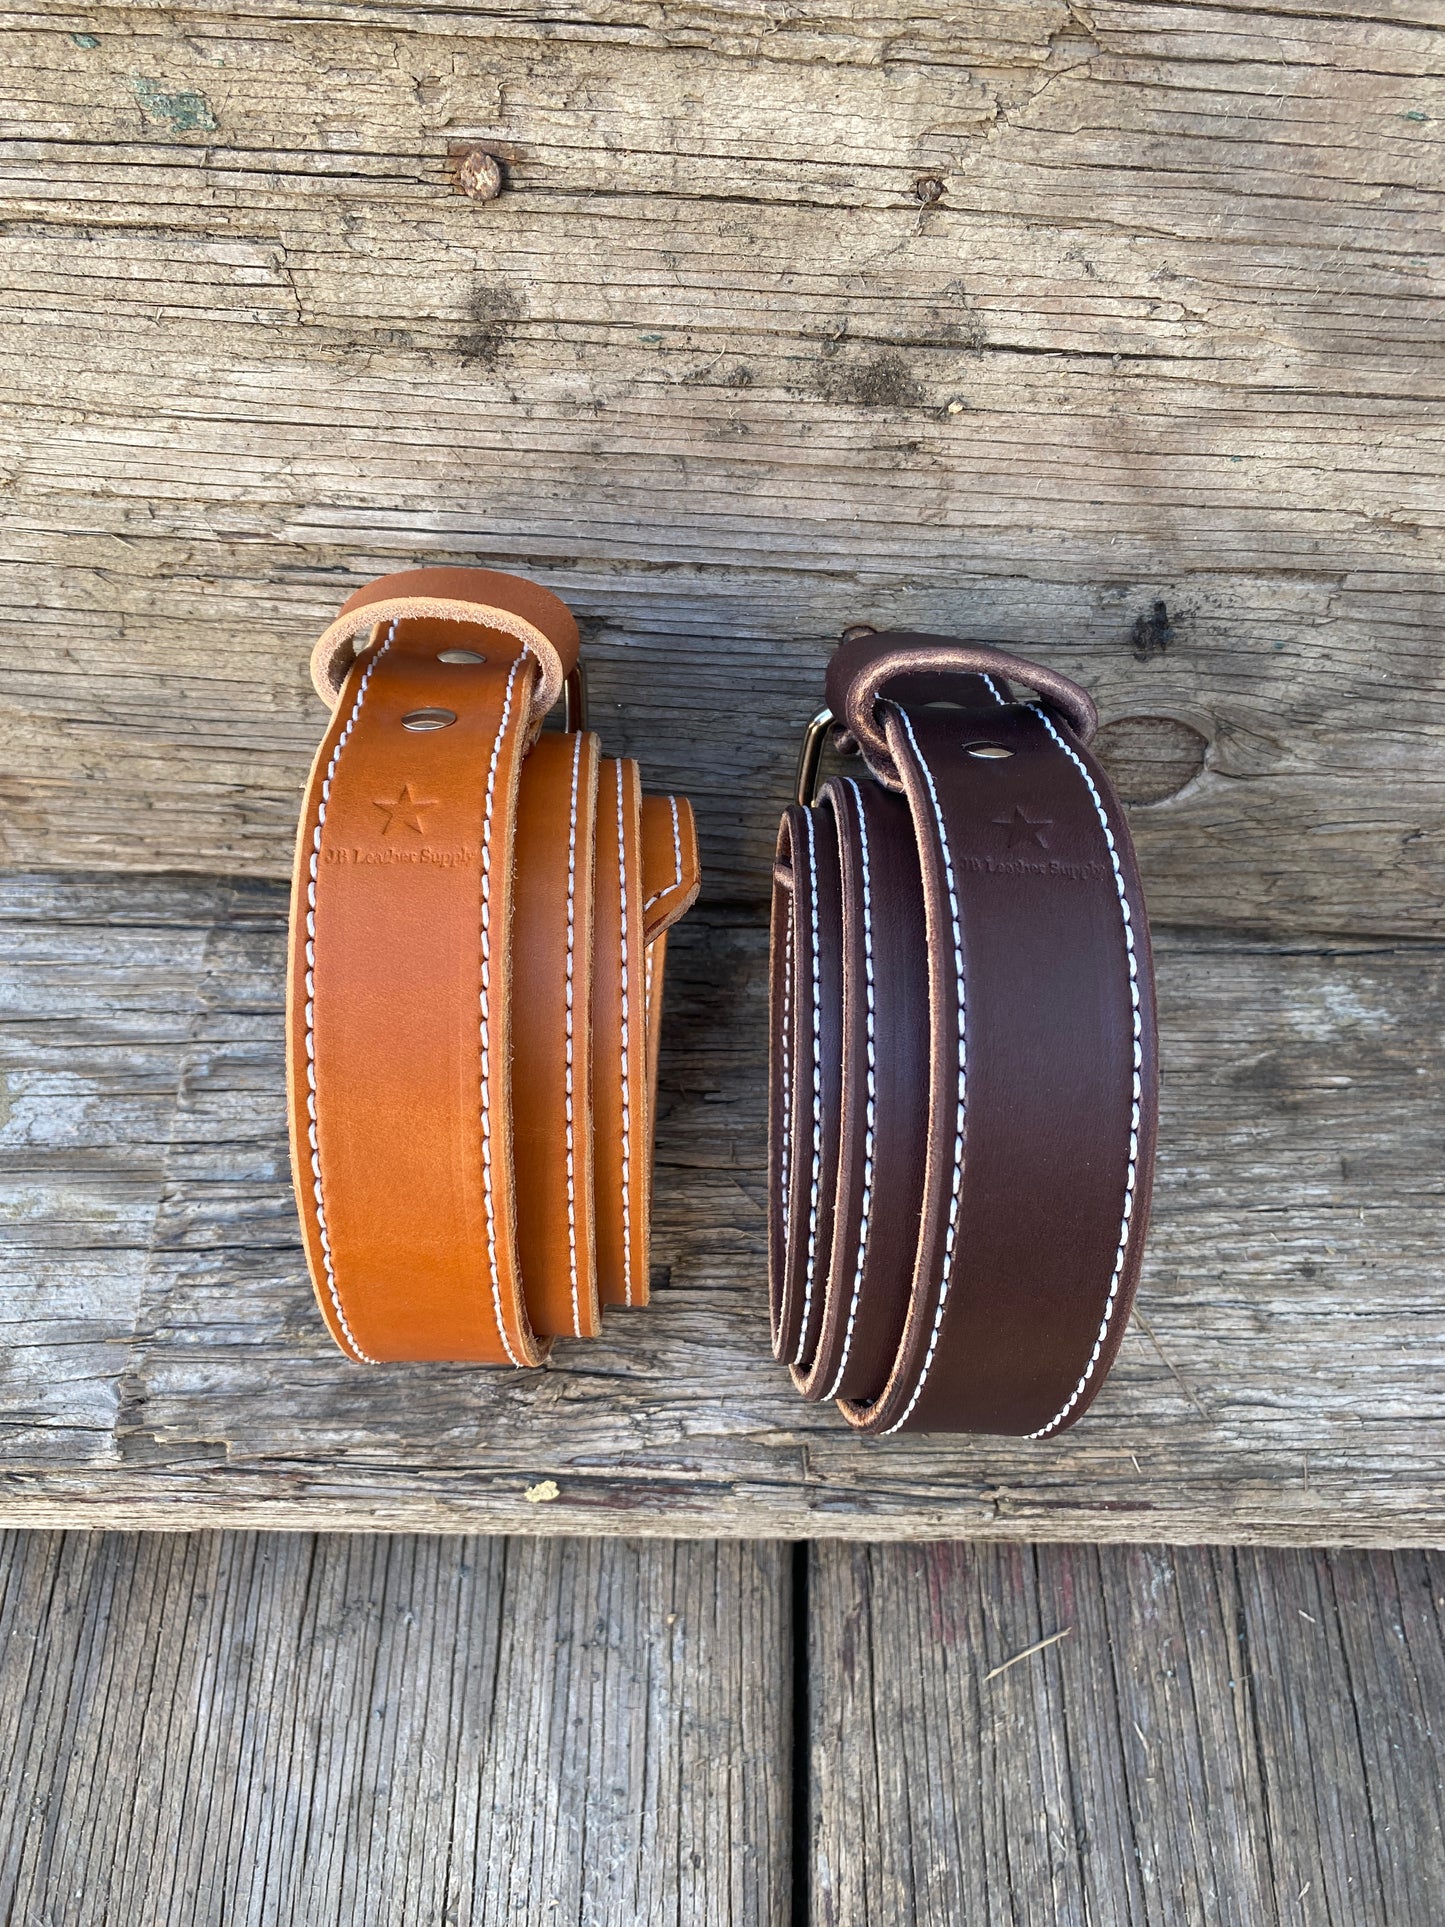 Add Stitching to your Foreverbelt